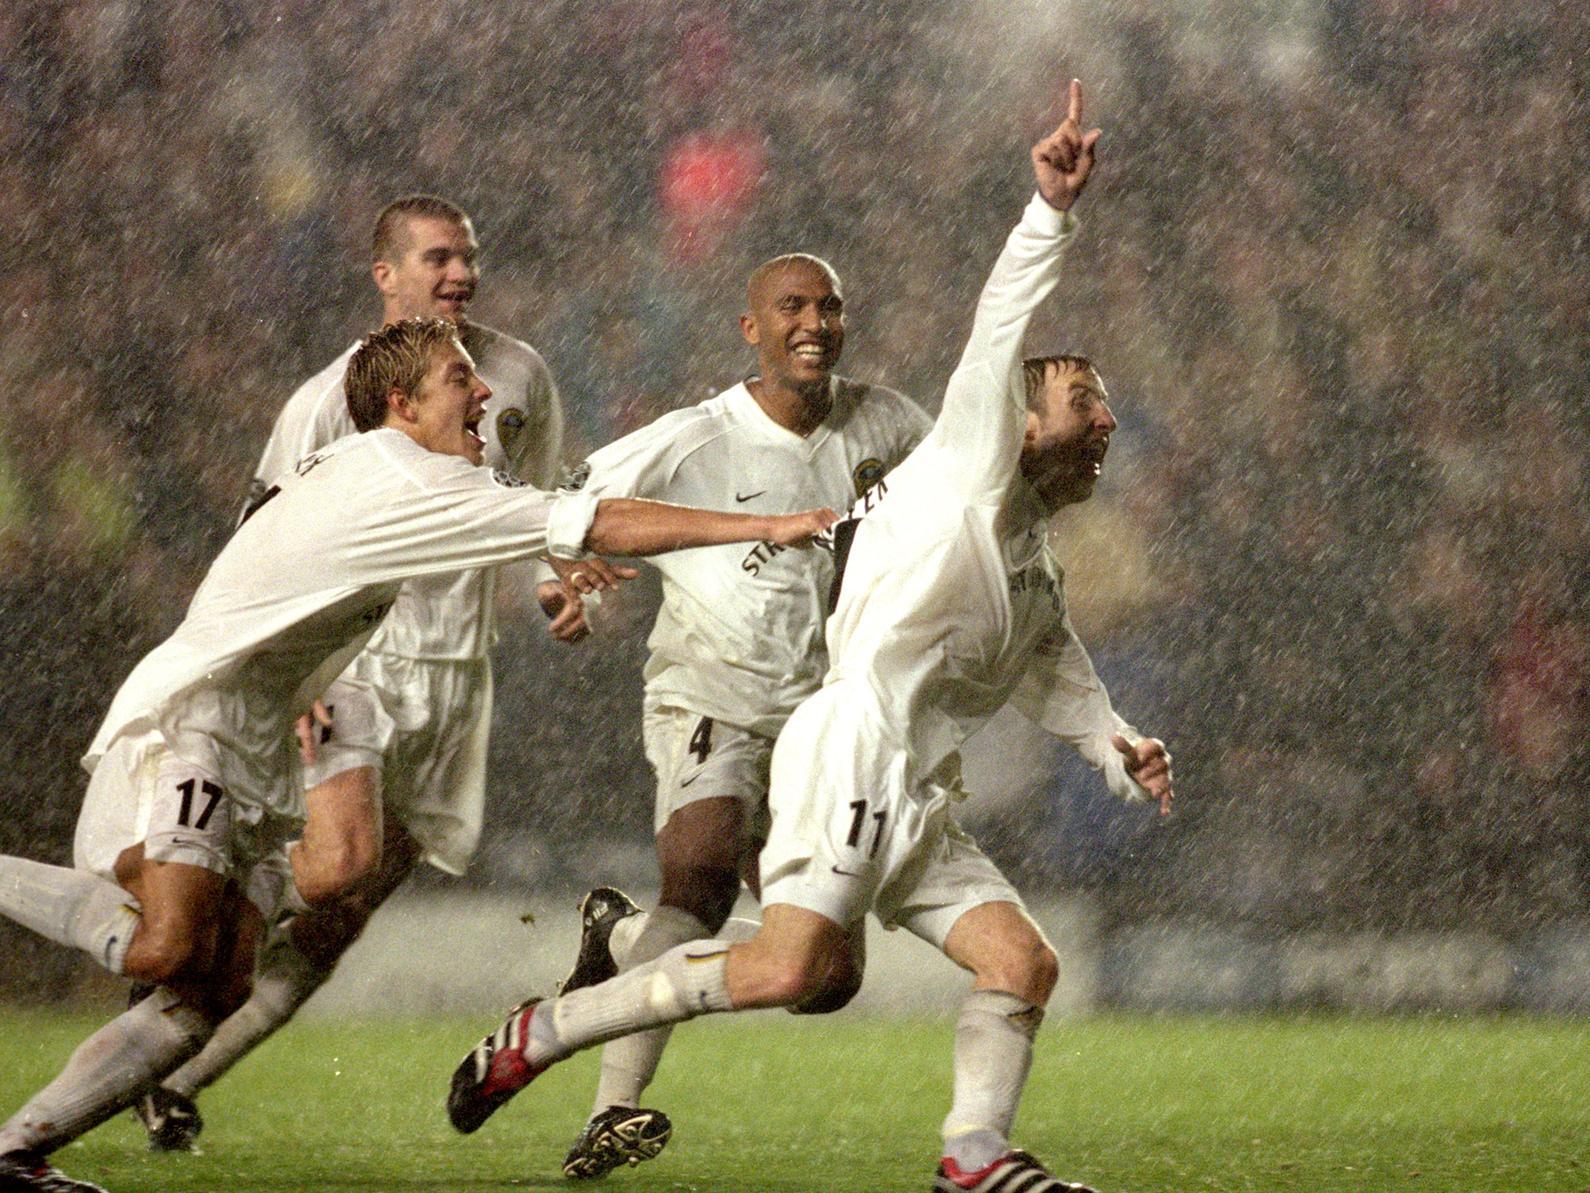 A catastrophic error from AC Milan's goalie Dida handed Leeds a priceless victory at waterlogged Elland Road. He  fumbled a hopeful 30-yard drive from Lee Bowyer with just two minutes remaining to give Whites the win.